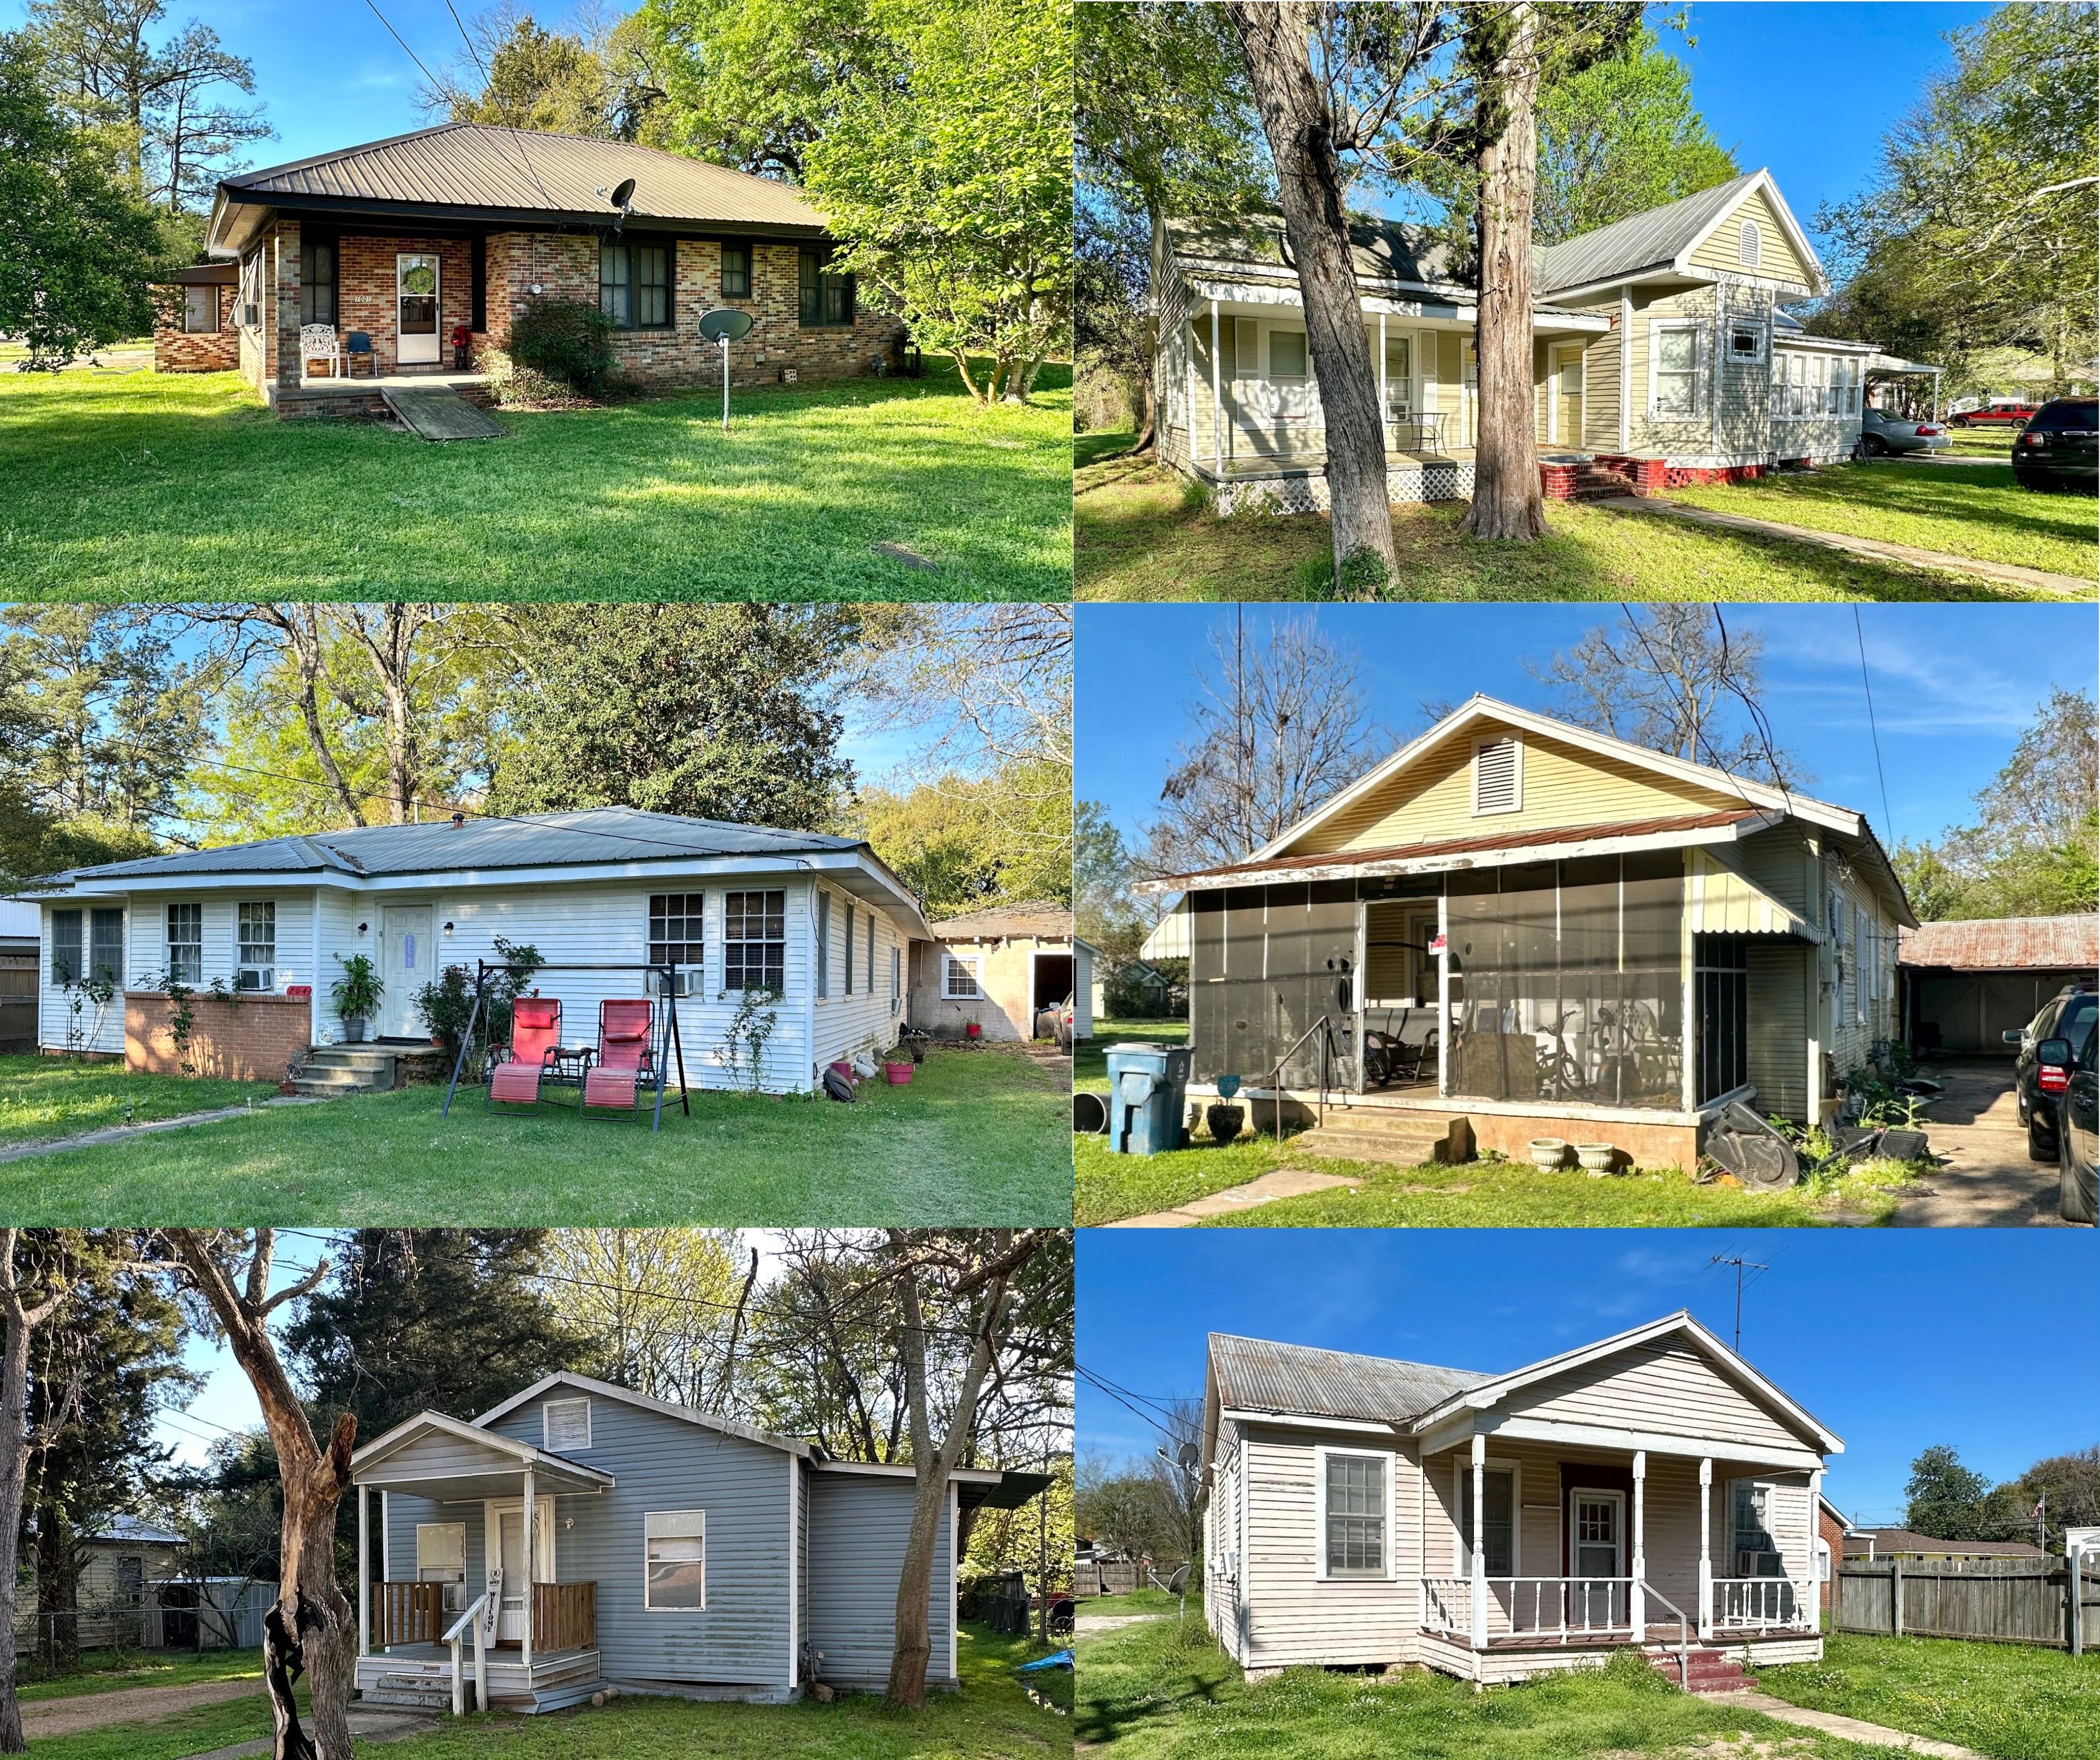 Investment Opportunity: Package Deal of 6 Rental Properties in Bunkie and Cottonport